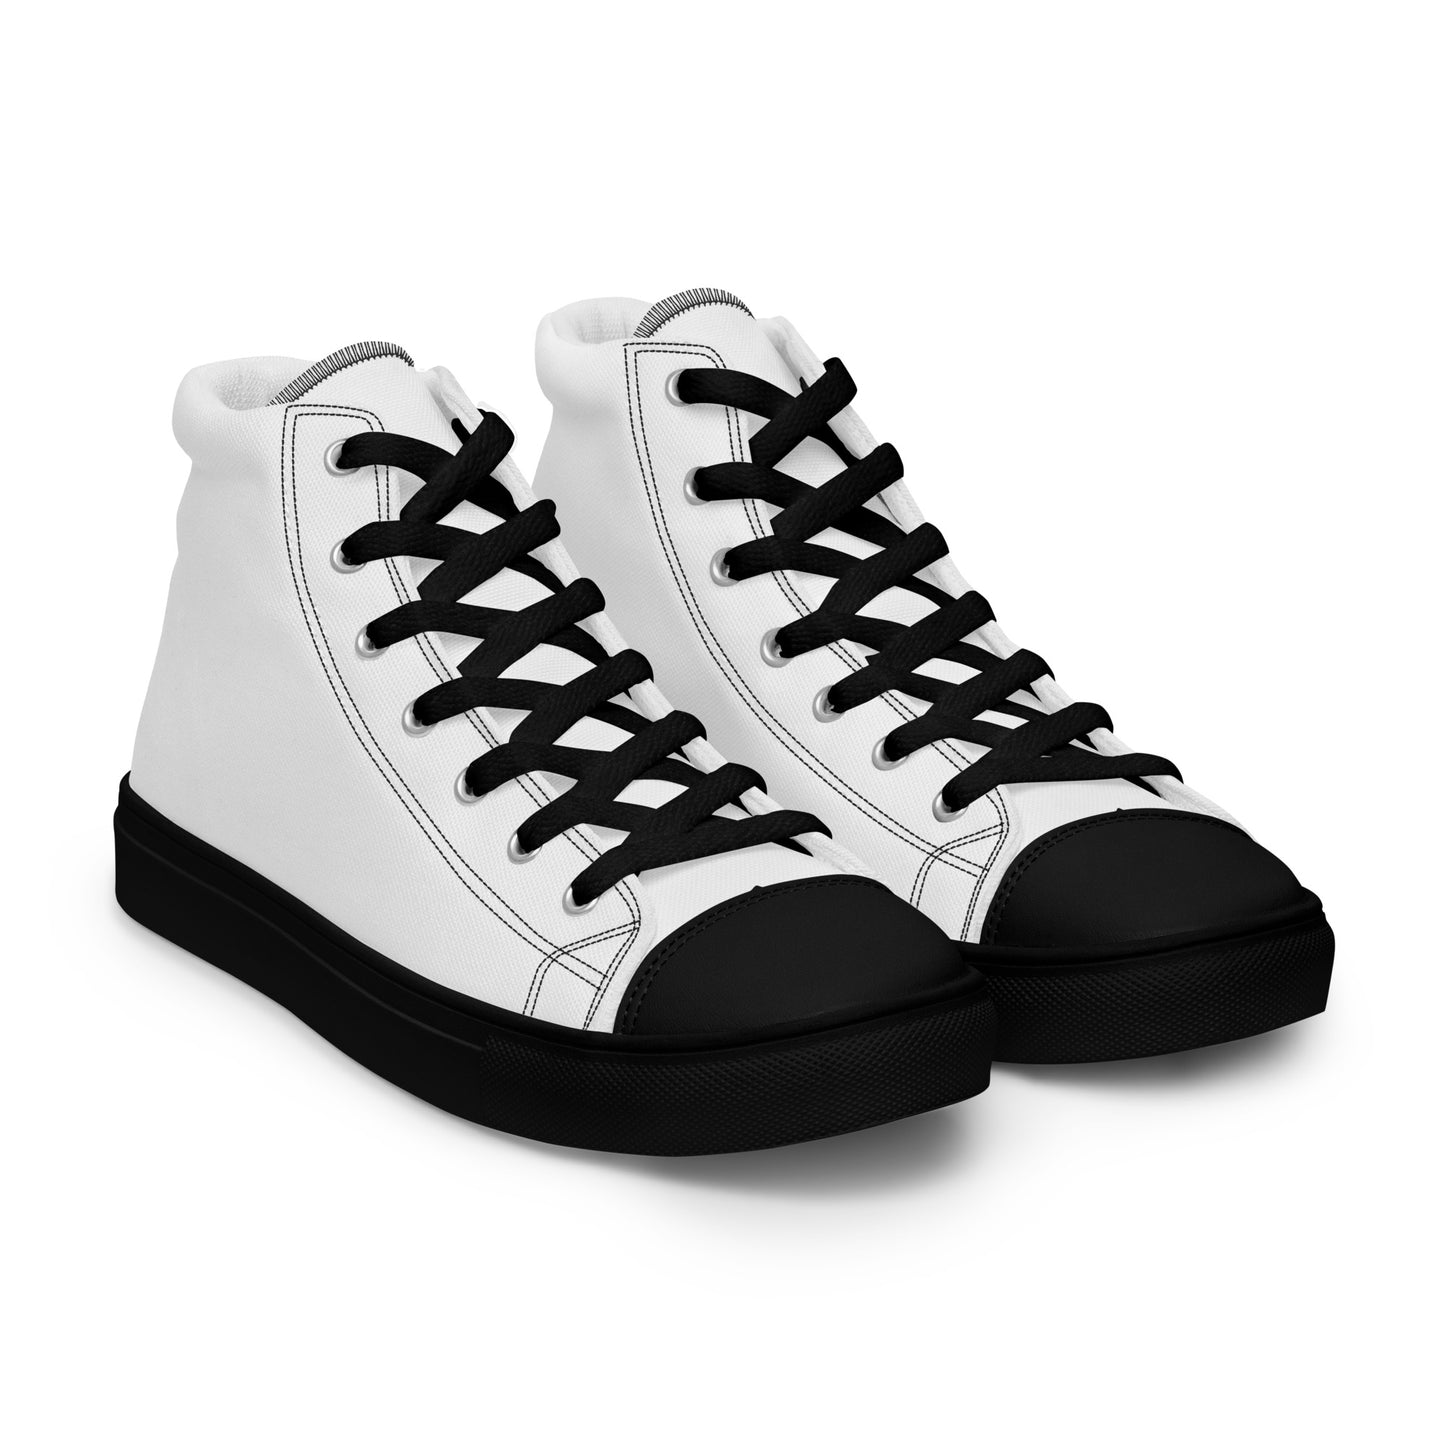 White Black - Sustainably Made Men's High Top Canvas Shoes